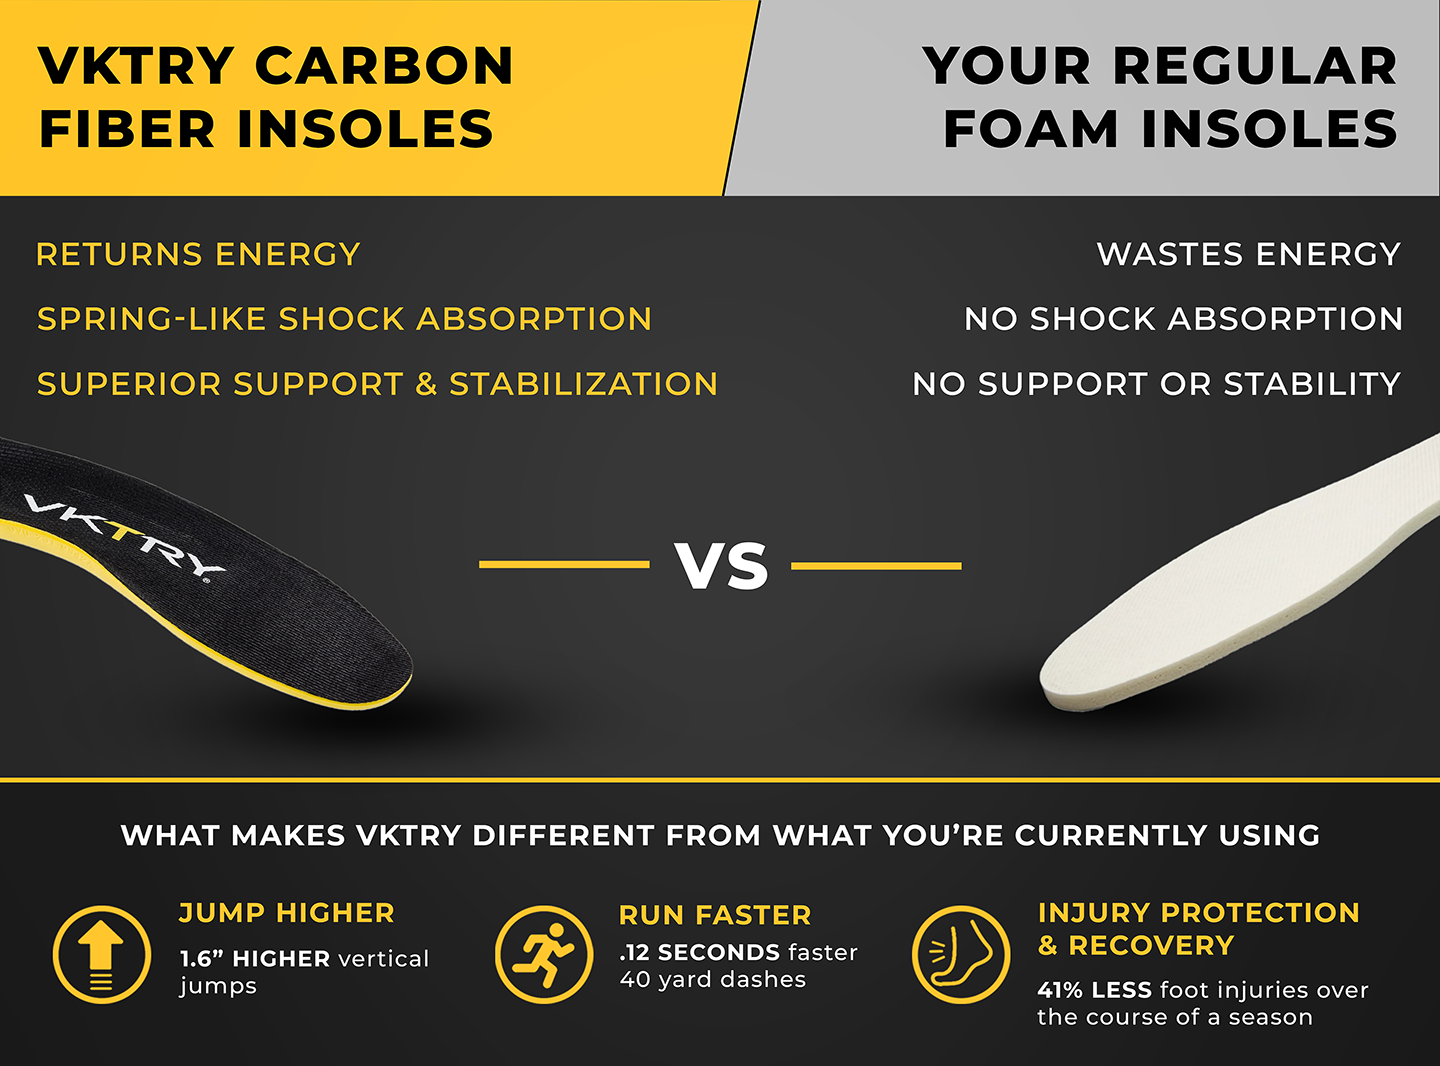 VKTRY carbon fiber Insoles return your energy, offer spring like shock absorption, and superior support and stabilization that your regular foam insoles can't compete with. Jump higher, run faster, and protect & recover from injuries with VKTRY Insoles